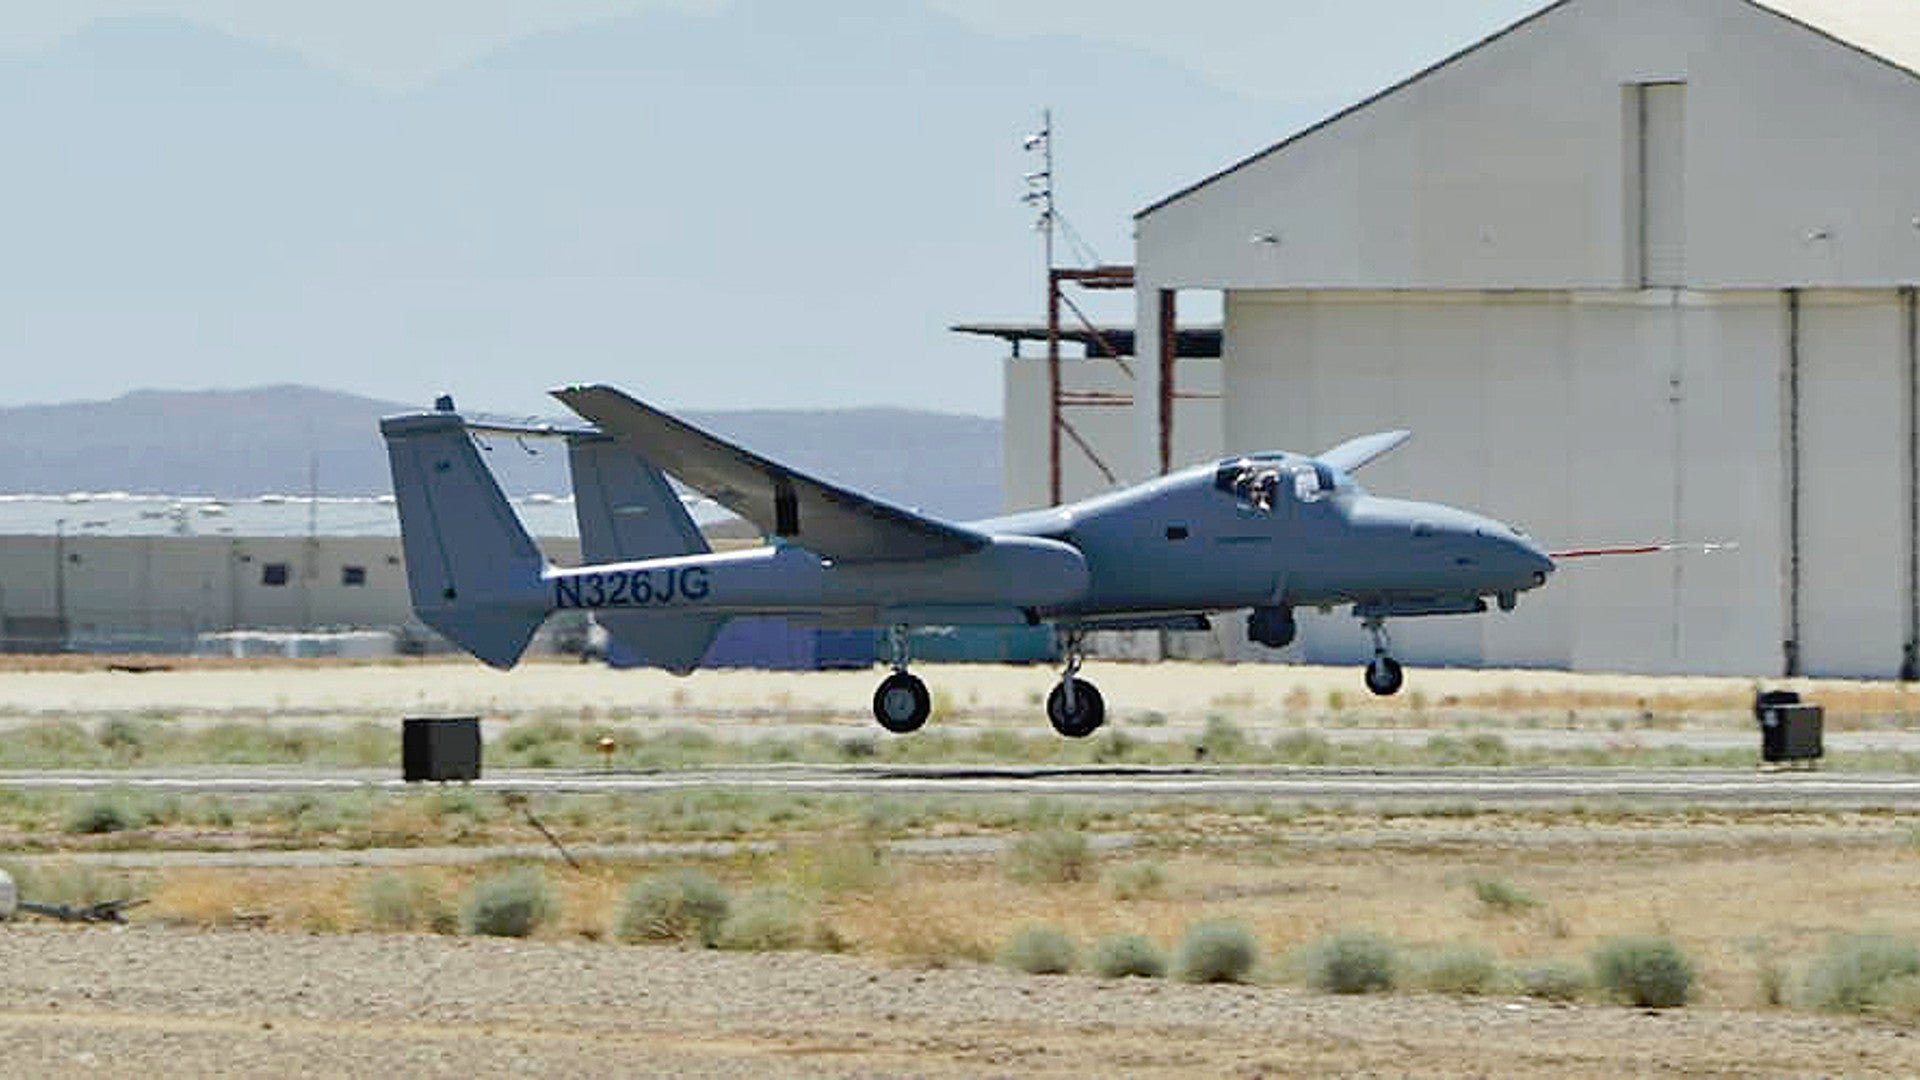 Northrop Grumman’s ‘H03’ Firebird Spy Plane Is Now Flying At Mojave Air and Space Port